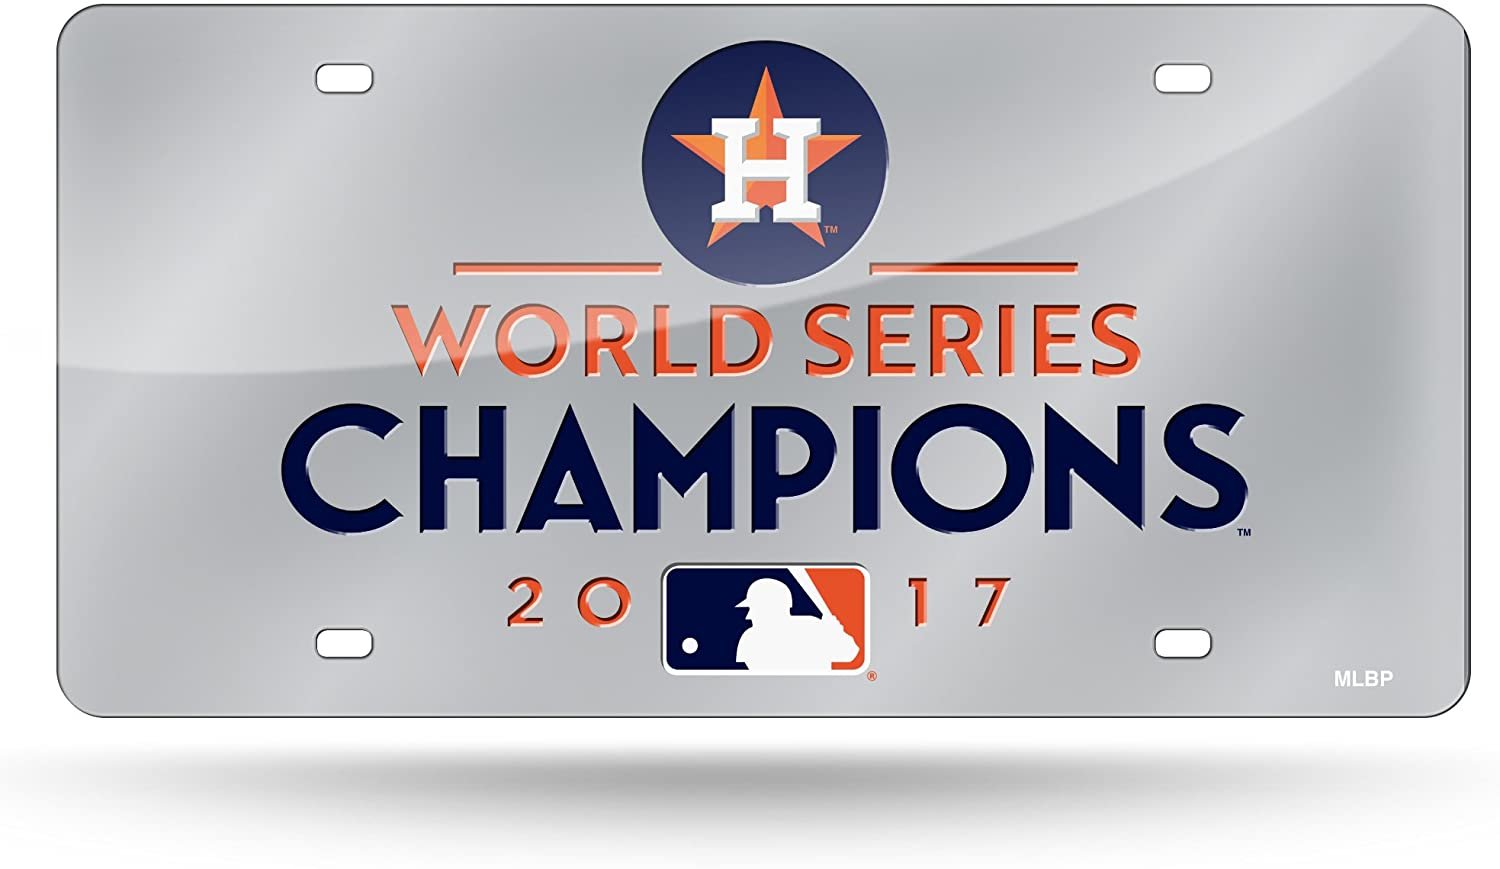 Houston Astros 2017 World Series Champions Laser Cut Tag License Plate, Mirrored Acrylic Inlaid, 12x6 Inch